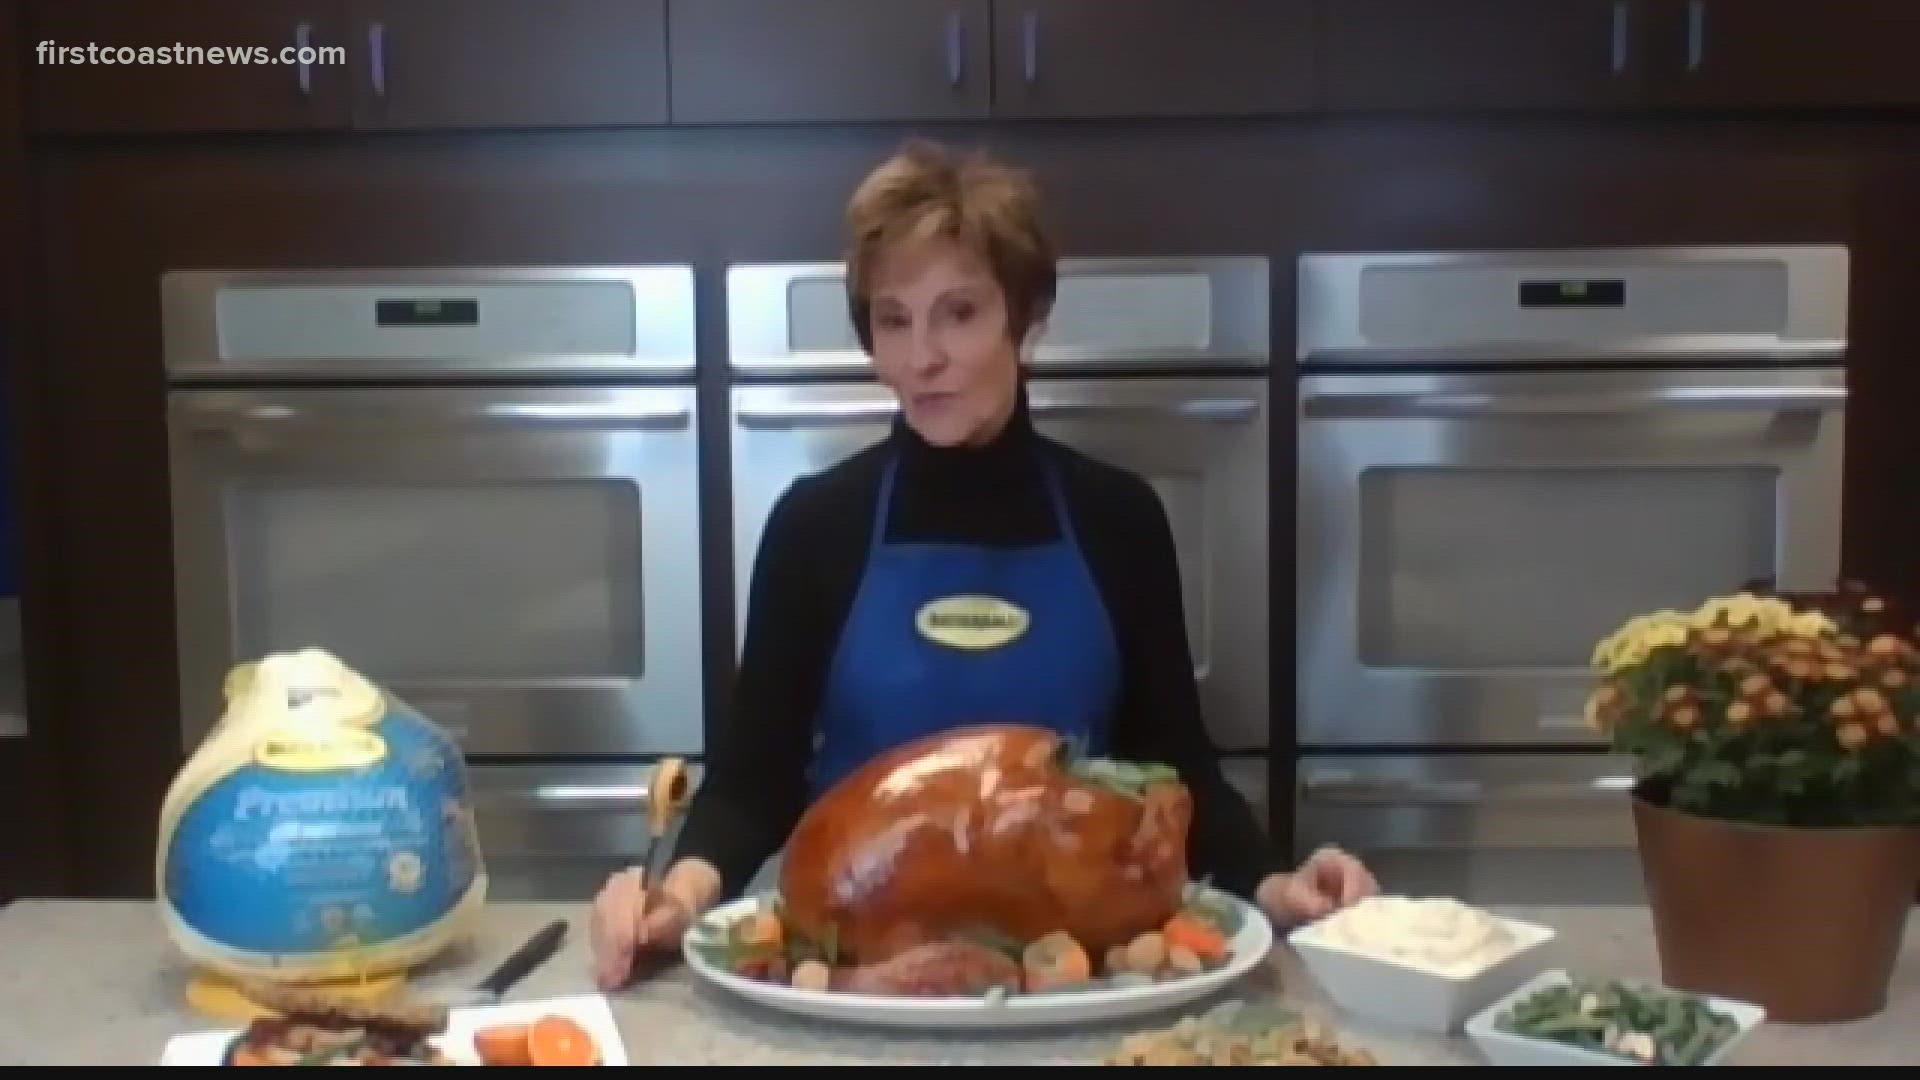 Phyllis Kramer said a lot of people call asking about how to thaw their turkeys on Thanksgiving Day.